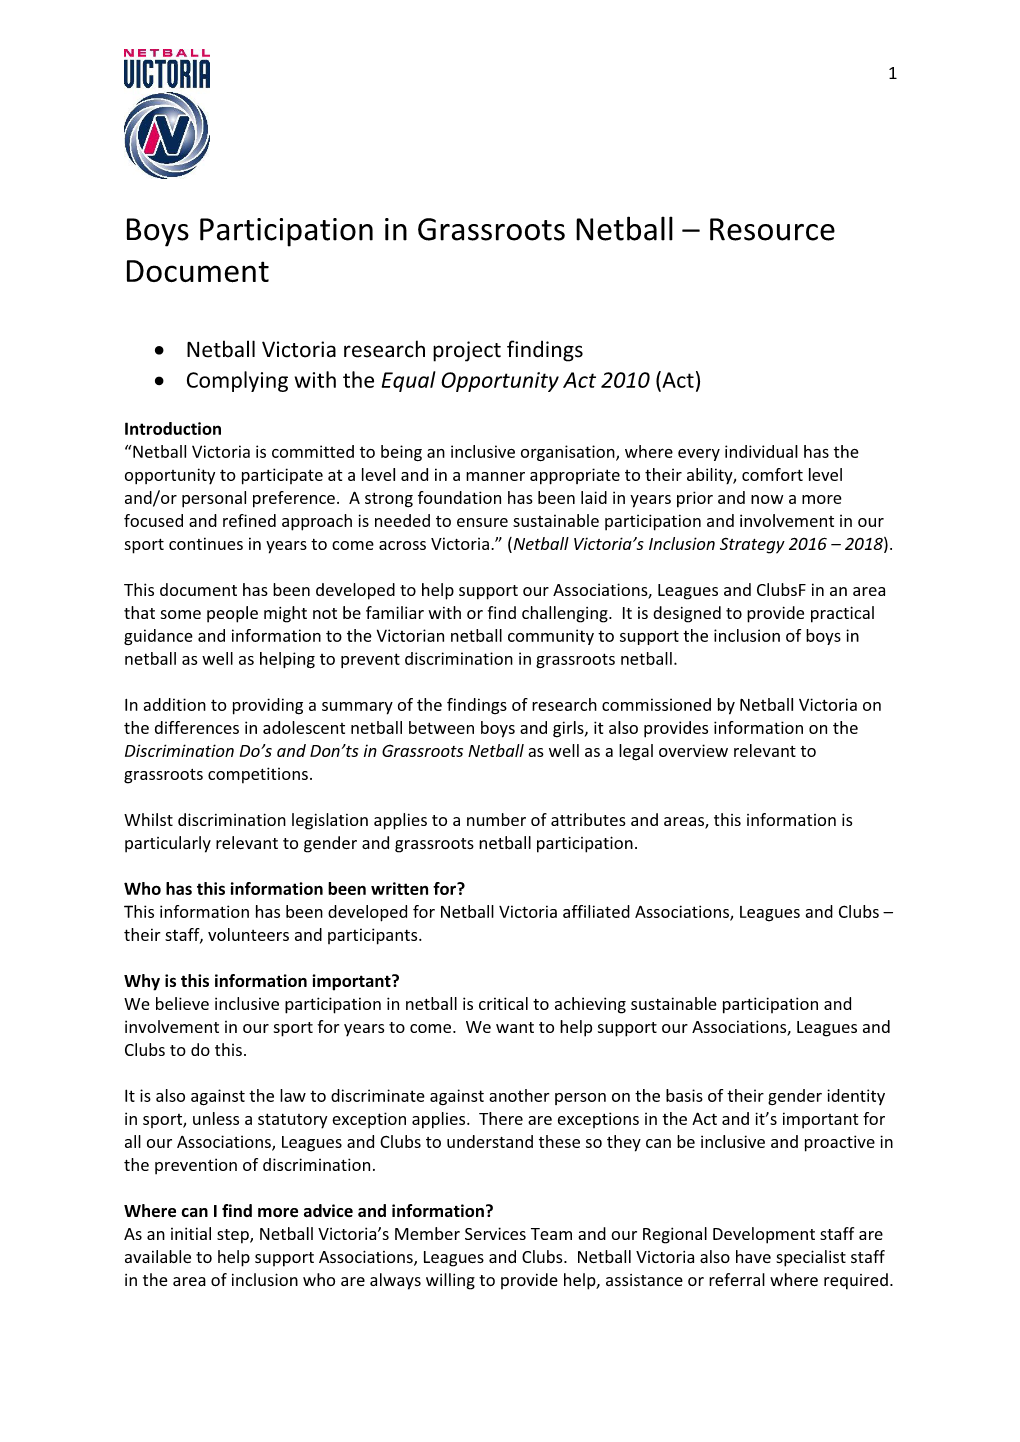 Boys Participation in Grassroots Netball 2016